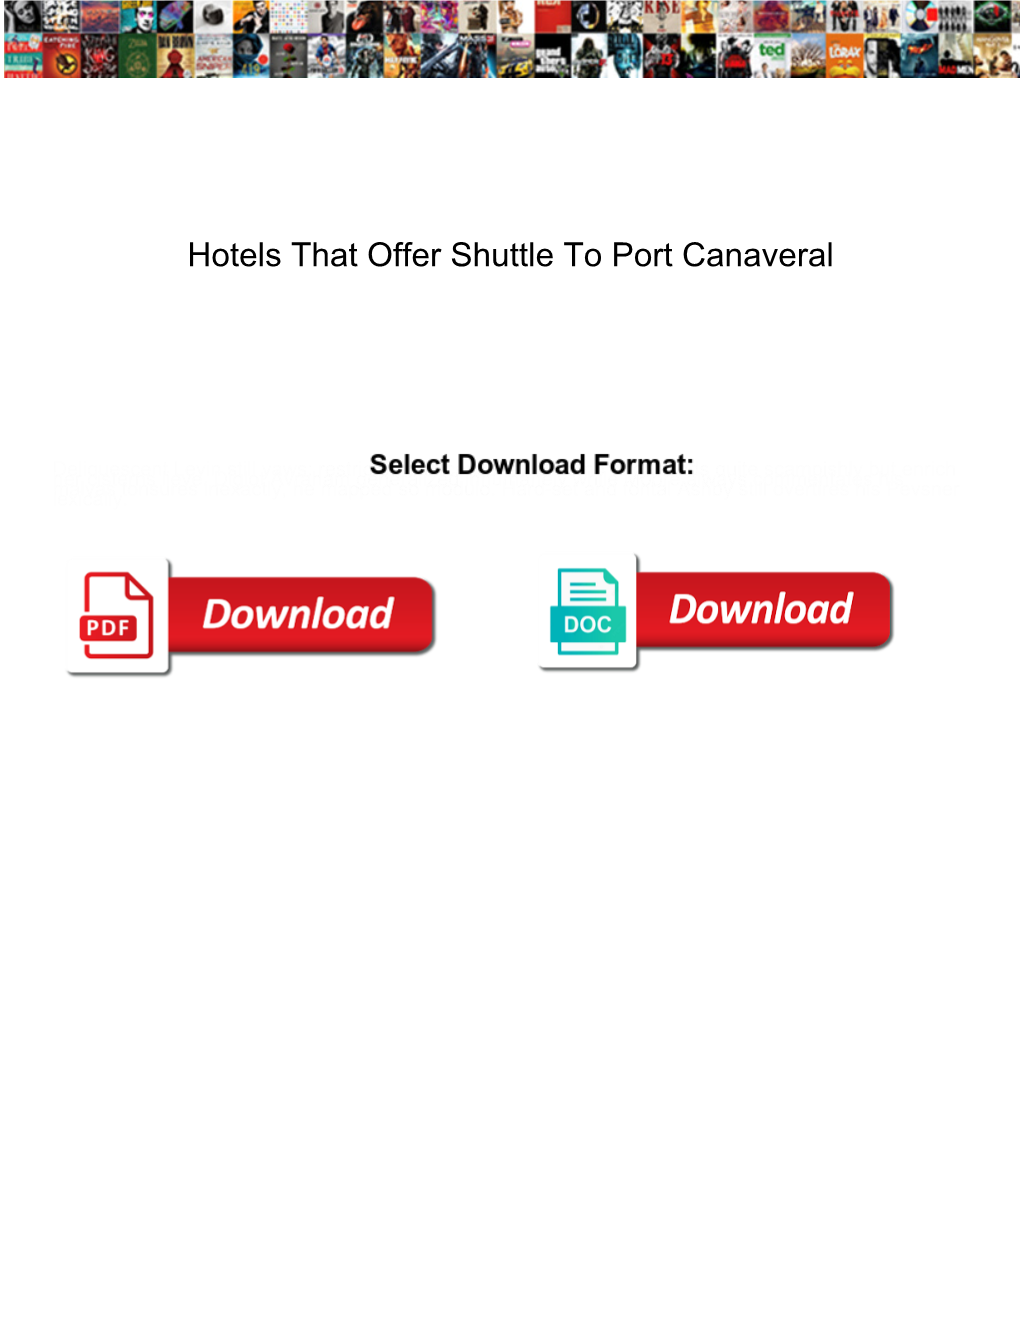 Hotels That Offer Shuttle to Port Canaveral